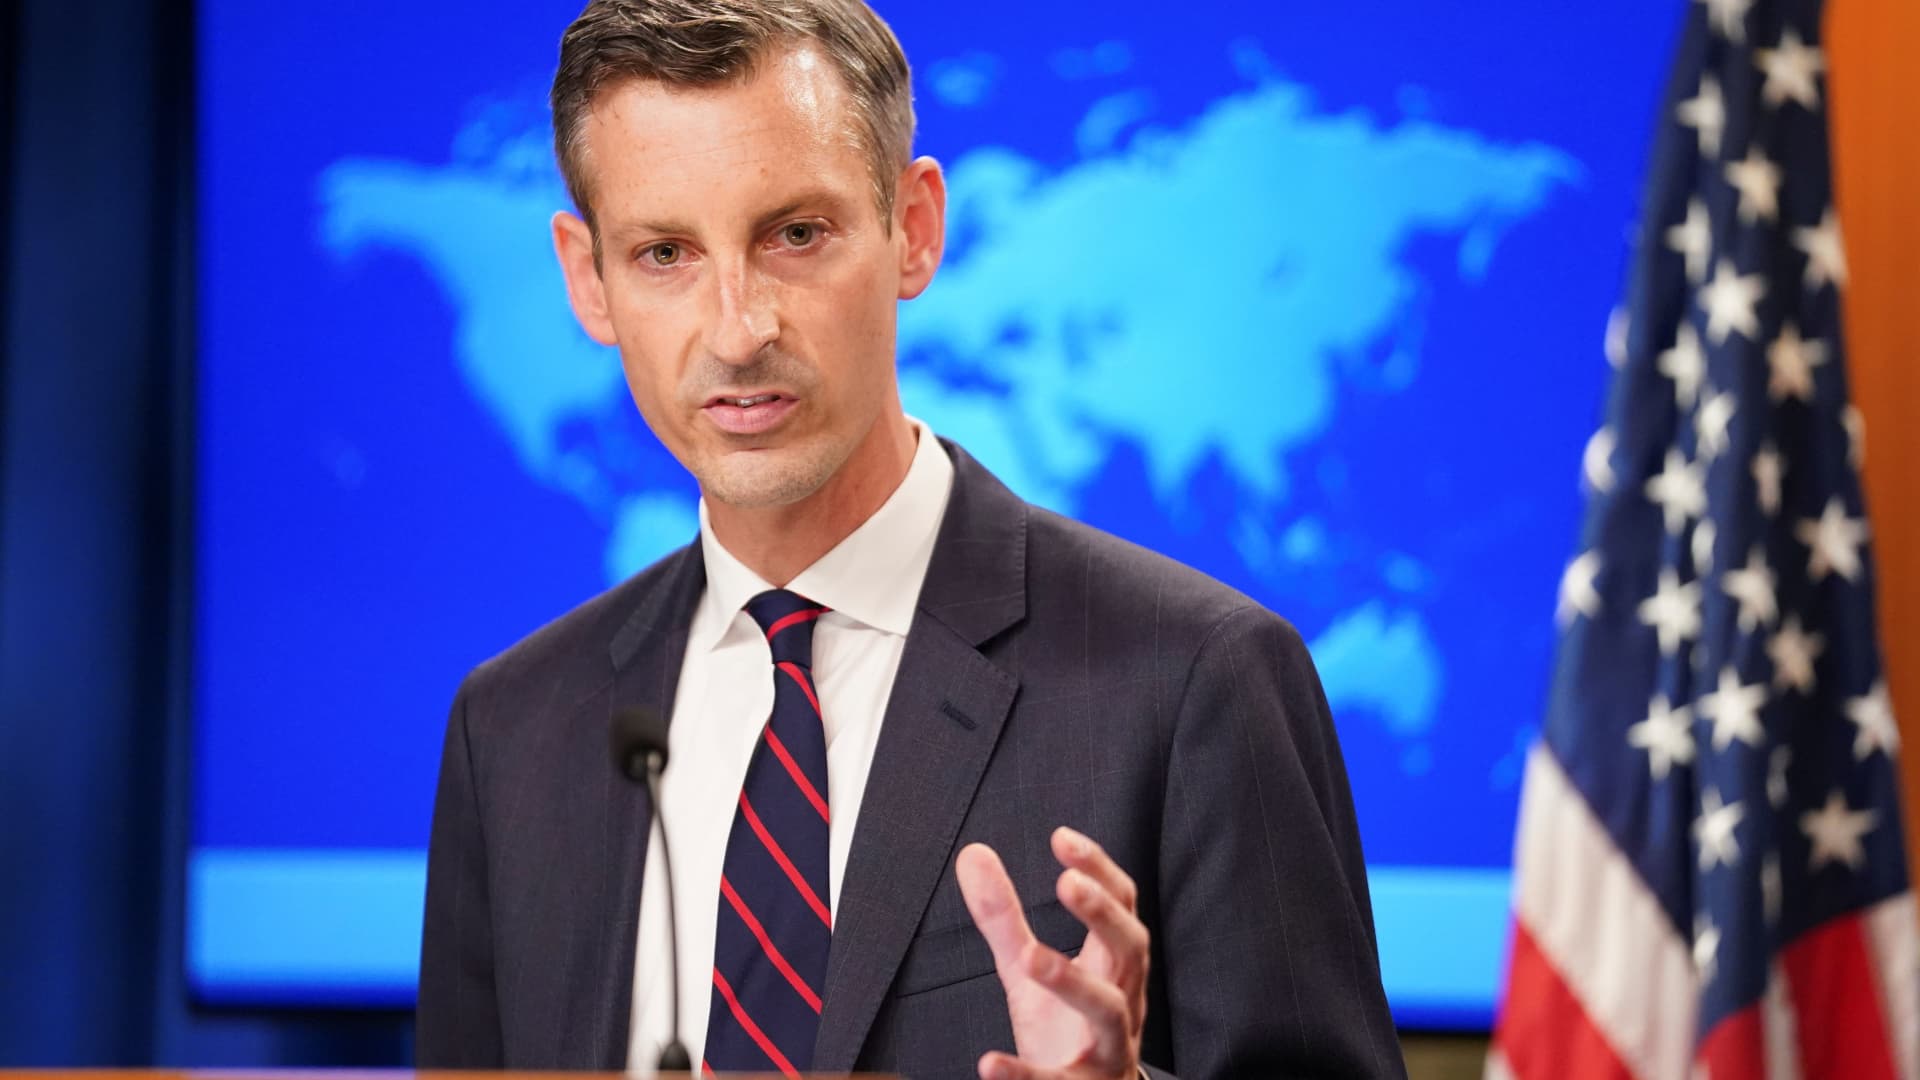 U.S. State Department spokesman Ned Price holds a press briefing on Afghanistan at the State Department in Washington, August 16, 2021.